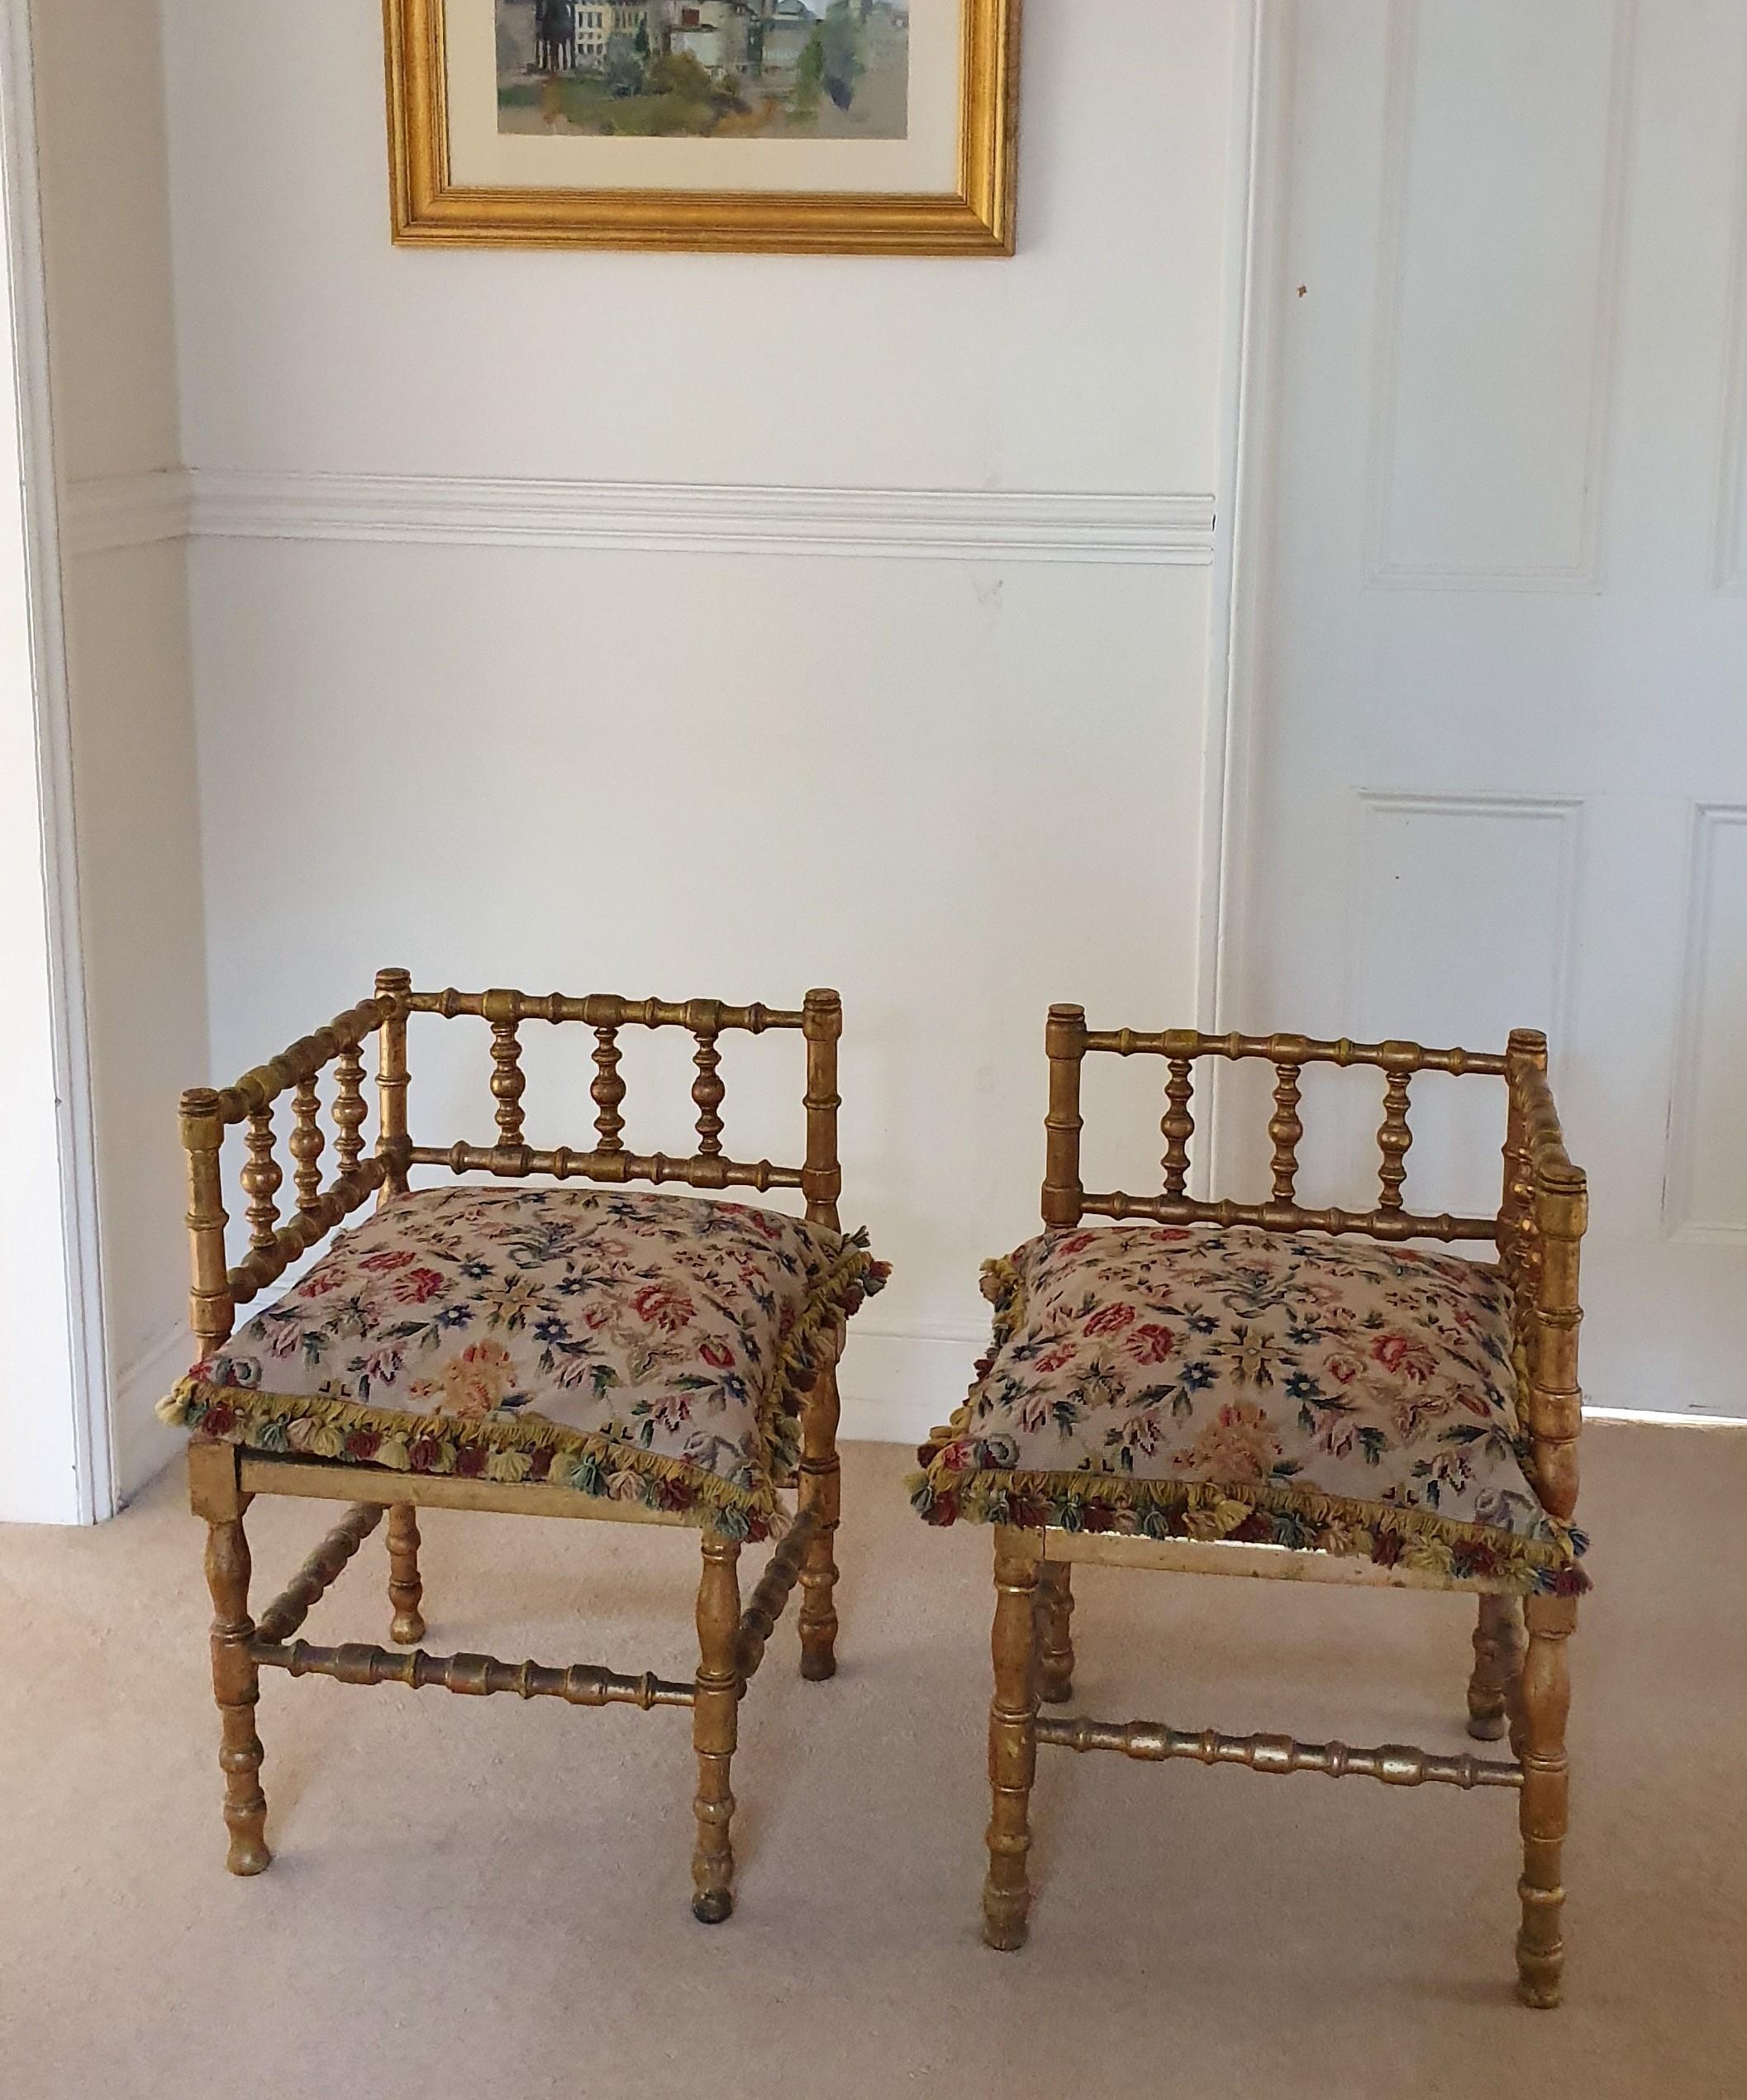 Pair of French Provincial Gilded Hand Carved Bobbin Chairs with Woven Cane Seats For Sale 1